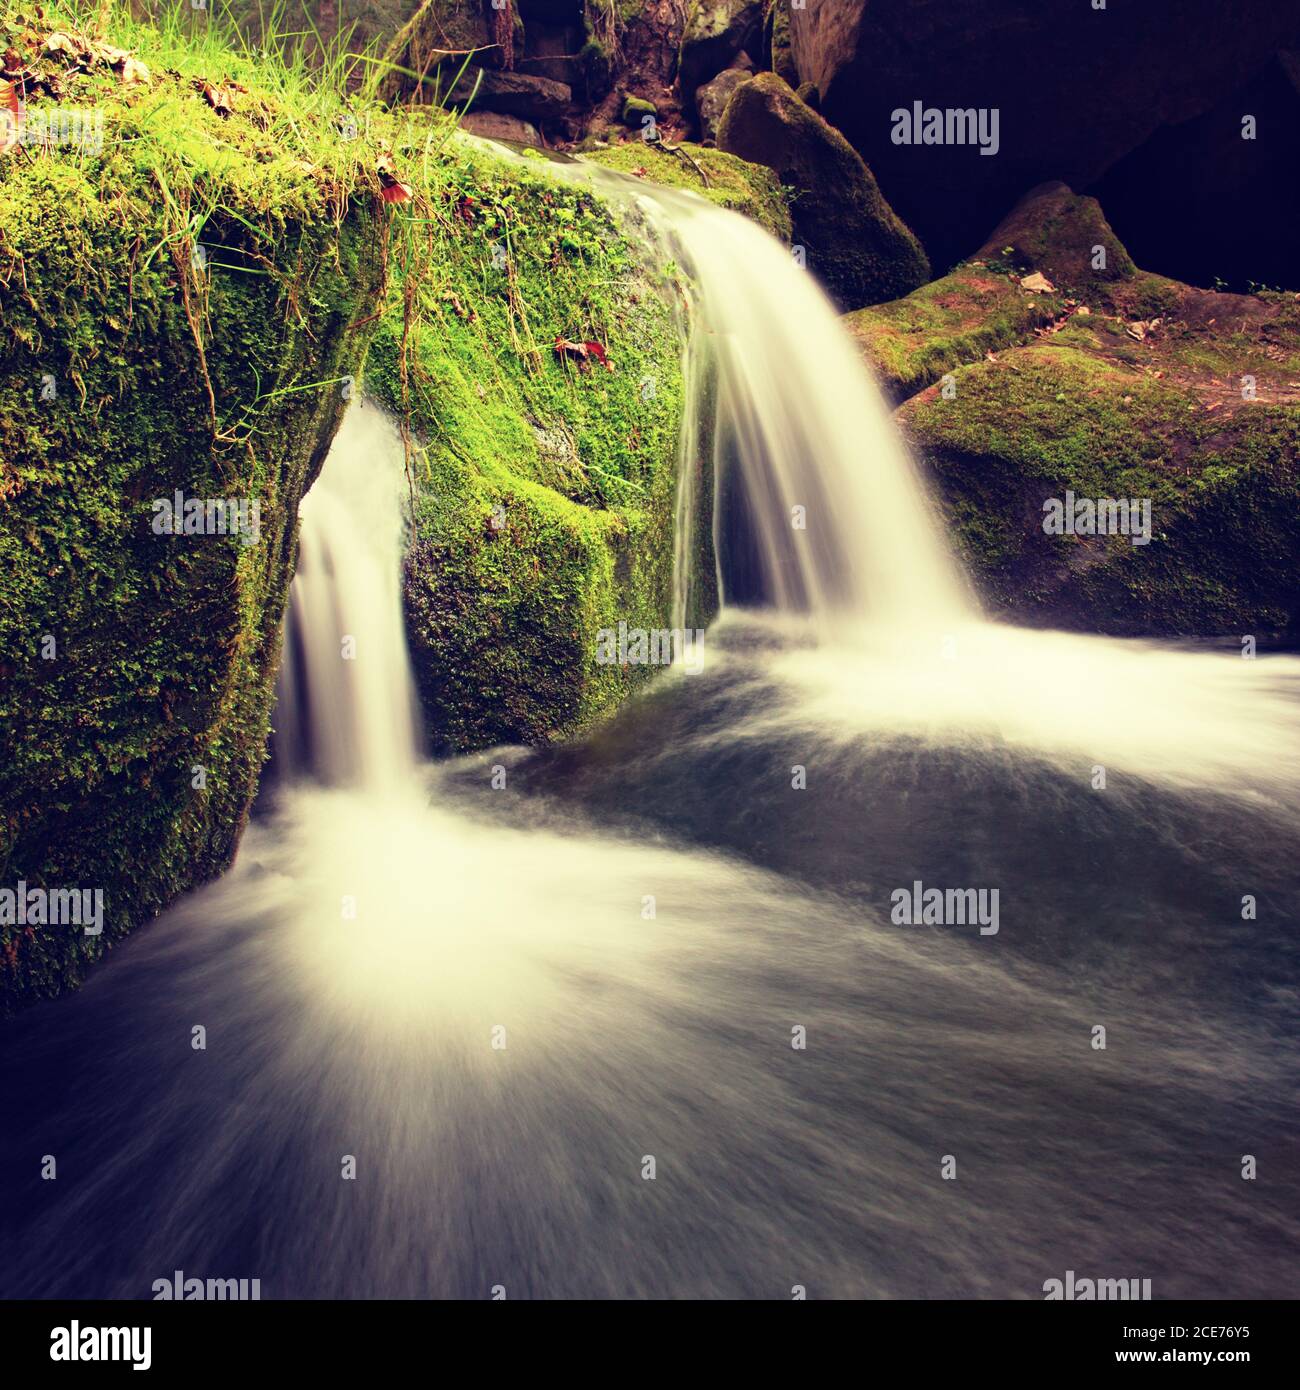 Cascade on small mountain stream. Cold crystal  water is falling over basalt mossy boulders into small pool. Stock Photo